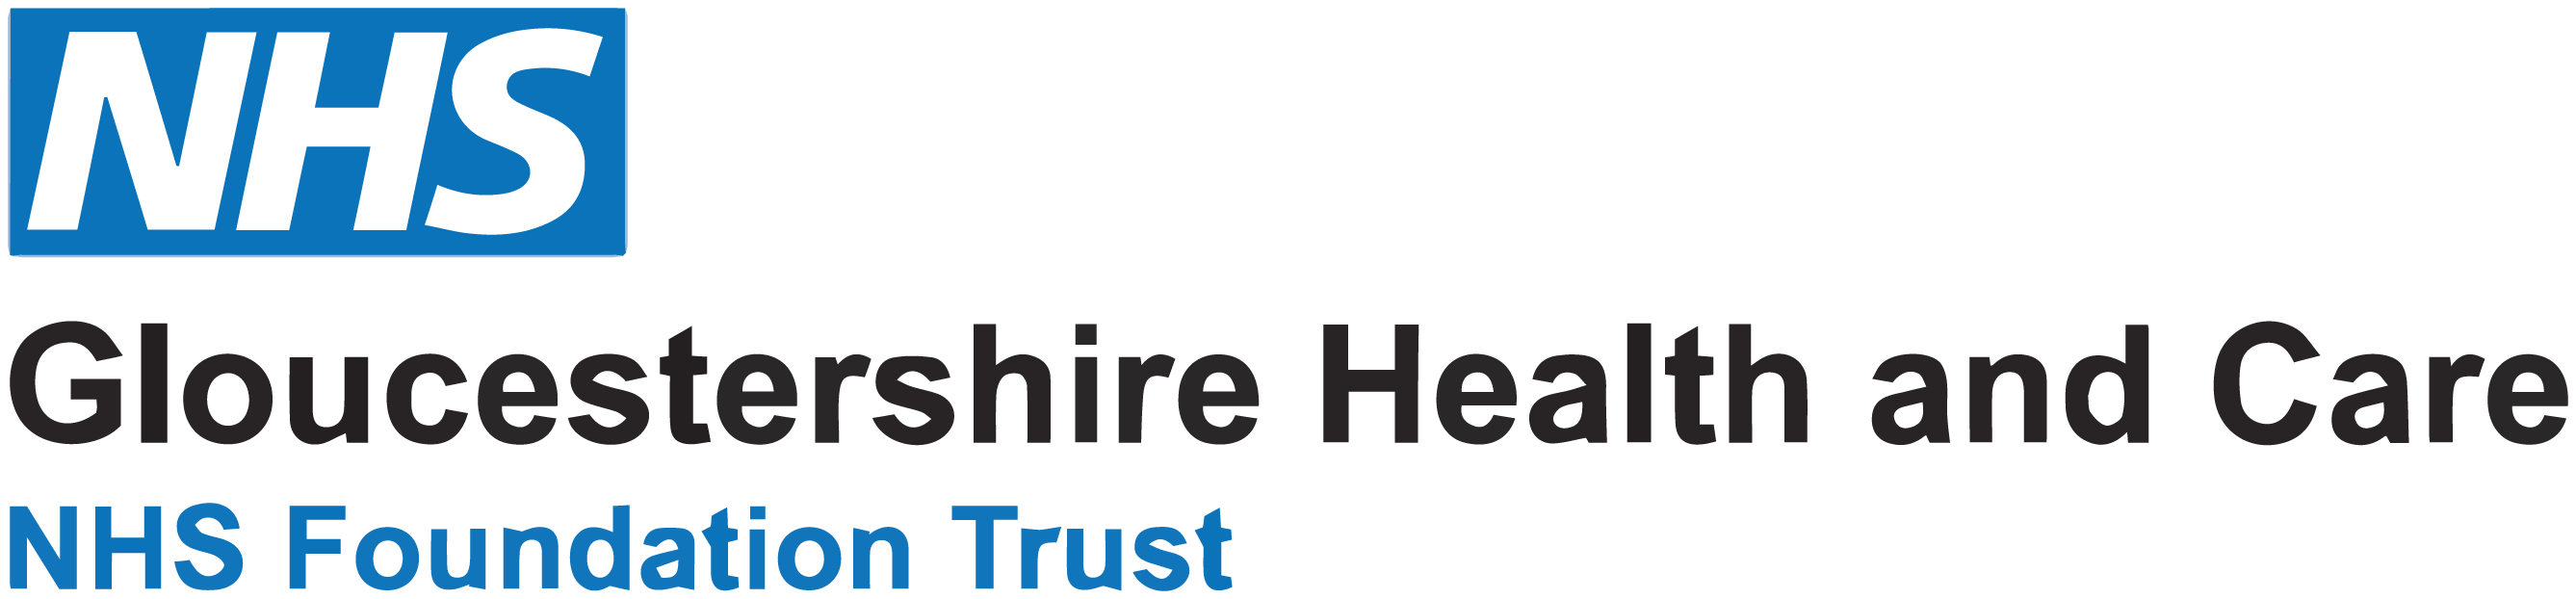 glos-health-and-care-logo-left